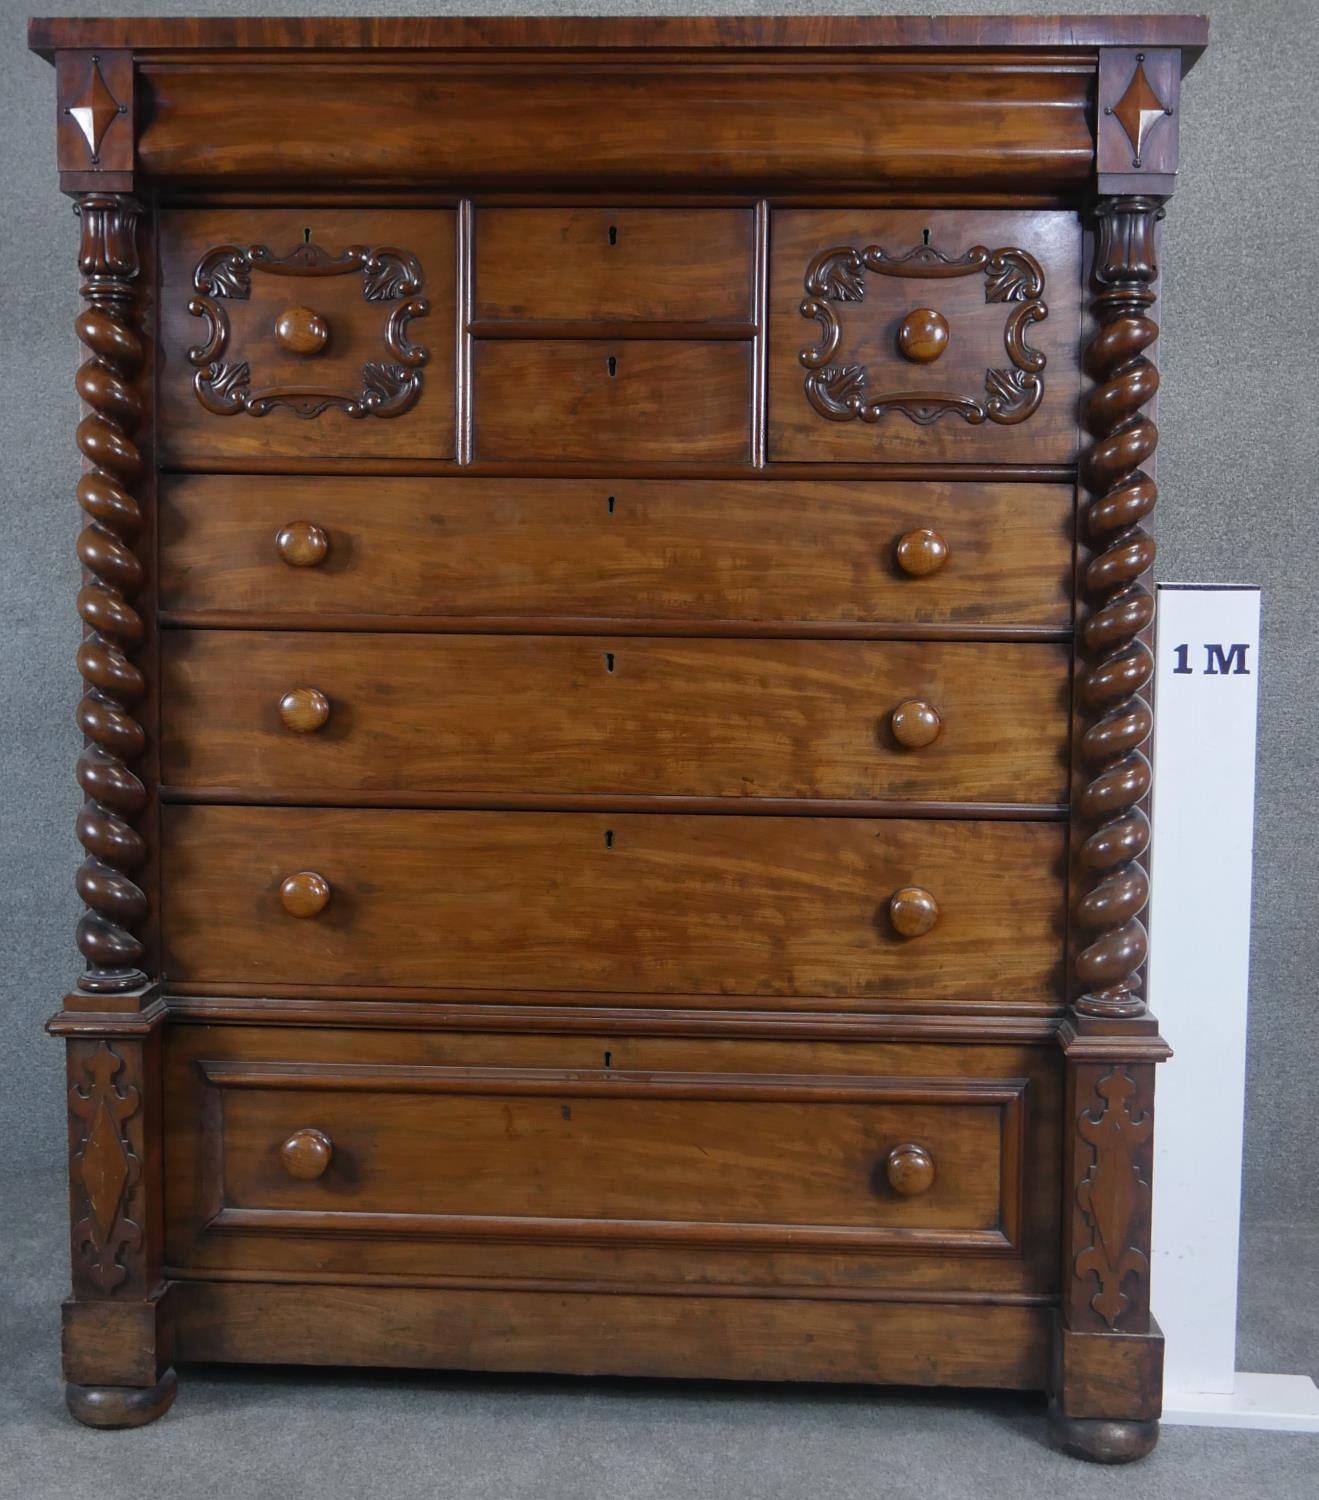 A 19th century mahogany Scottish chest of drawers with and arrangement of drawers flanked by - Image 7 of 7